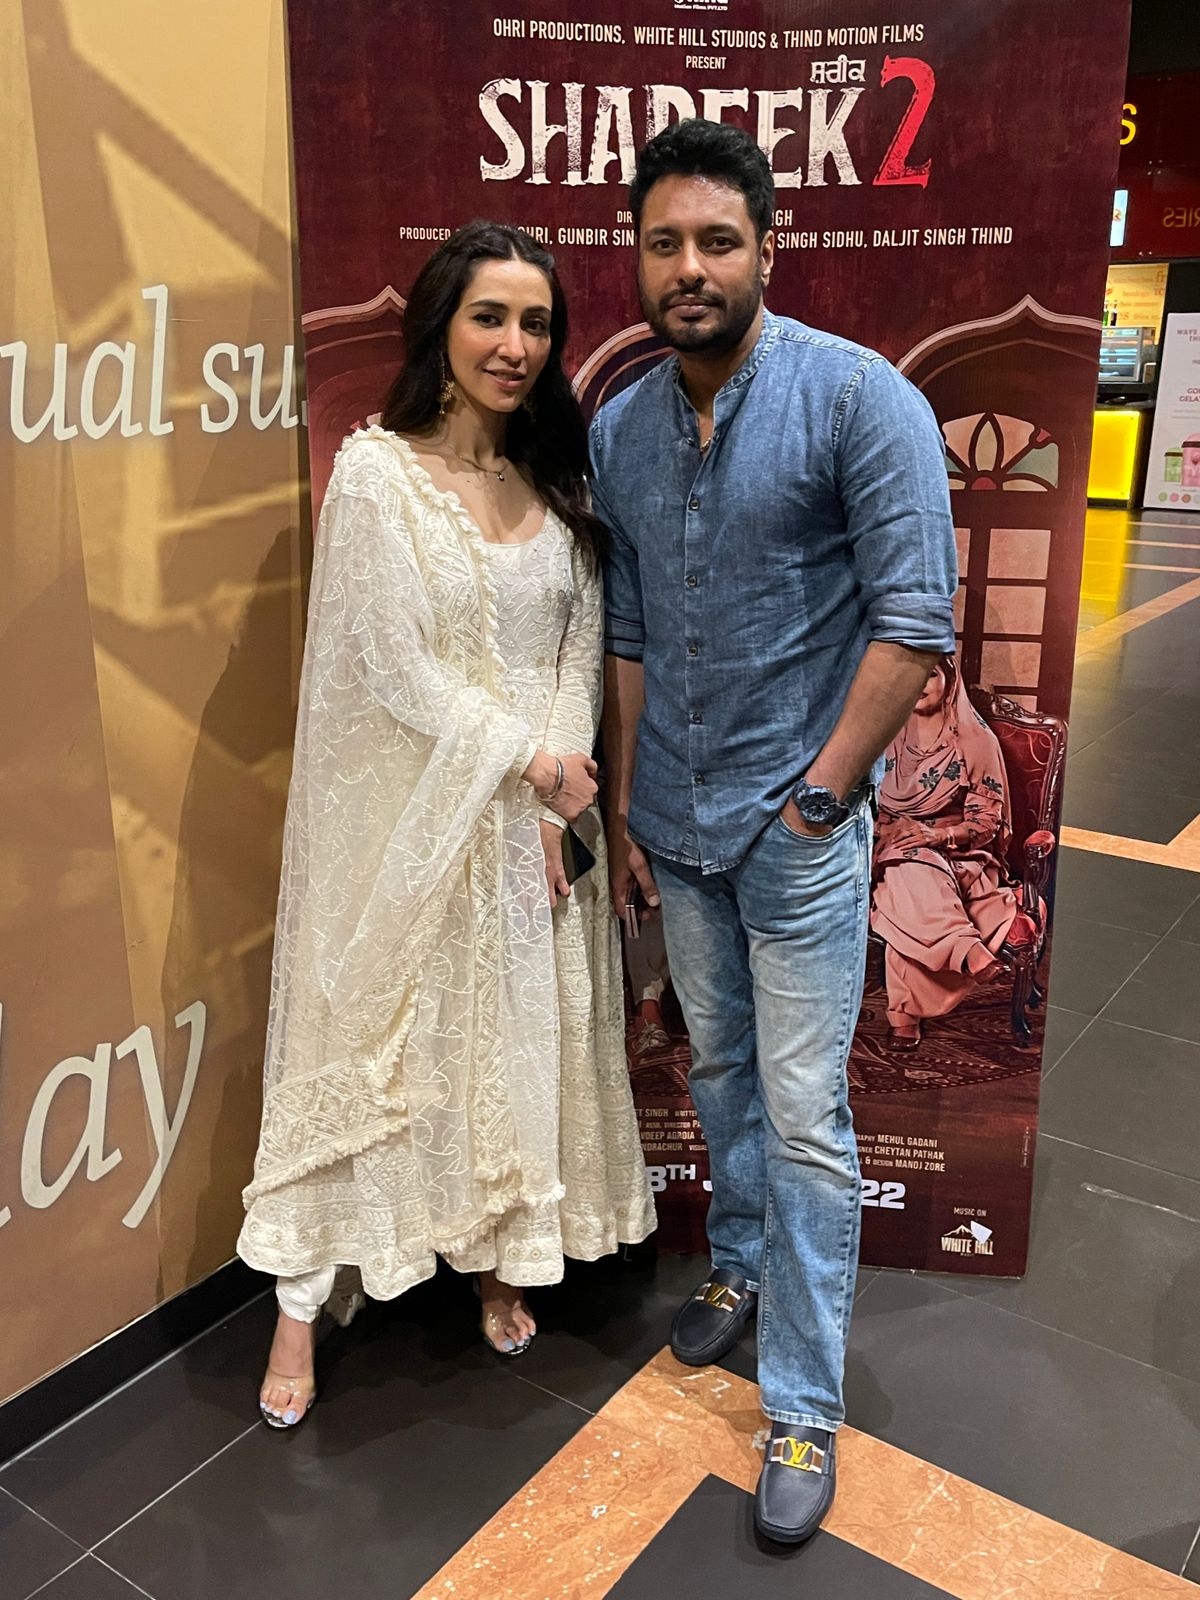 Dev Kharoud and Sharan Kaur, who will be essaying lead roles in Punjabi film Shareek 2, echo how it's a dream come true for them to share screen with Jimmy Shergill